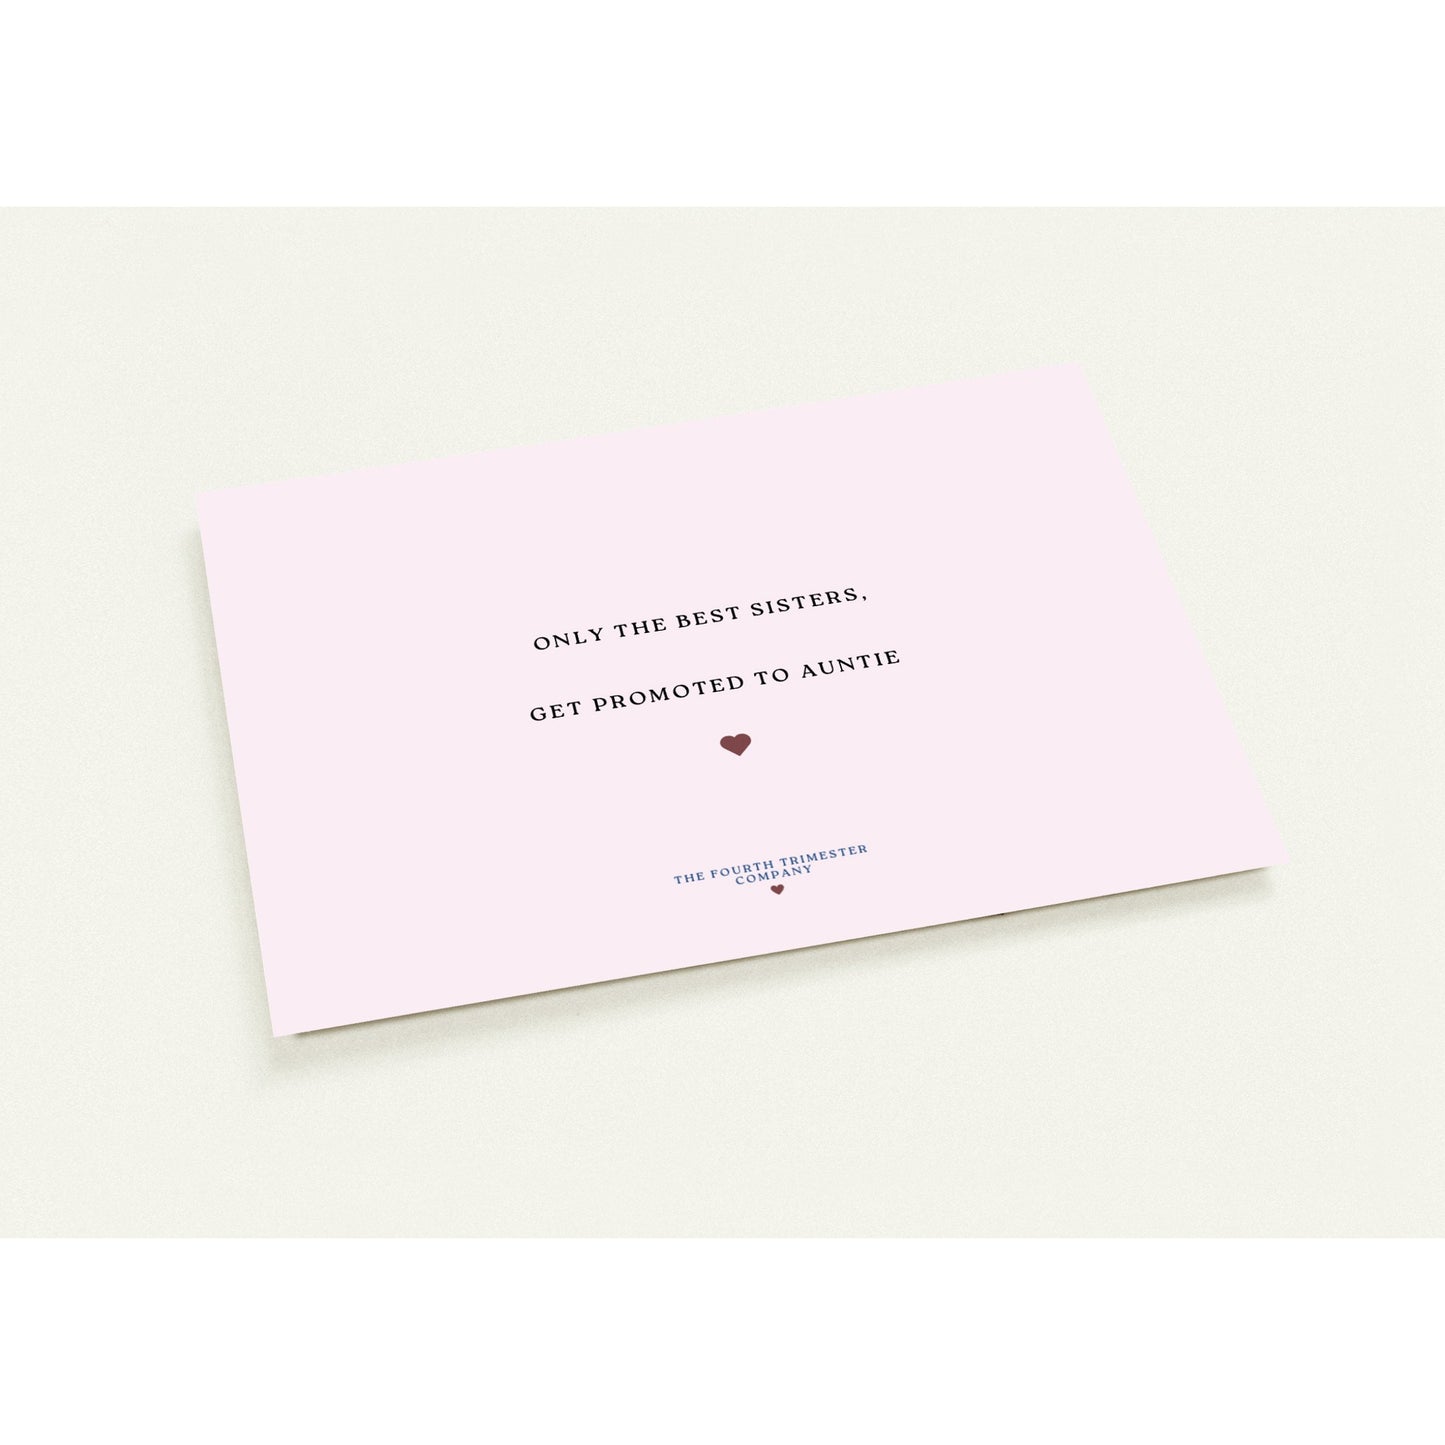 'Only the best Sisters' 10 Announcement Cards -Blush Pink.